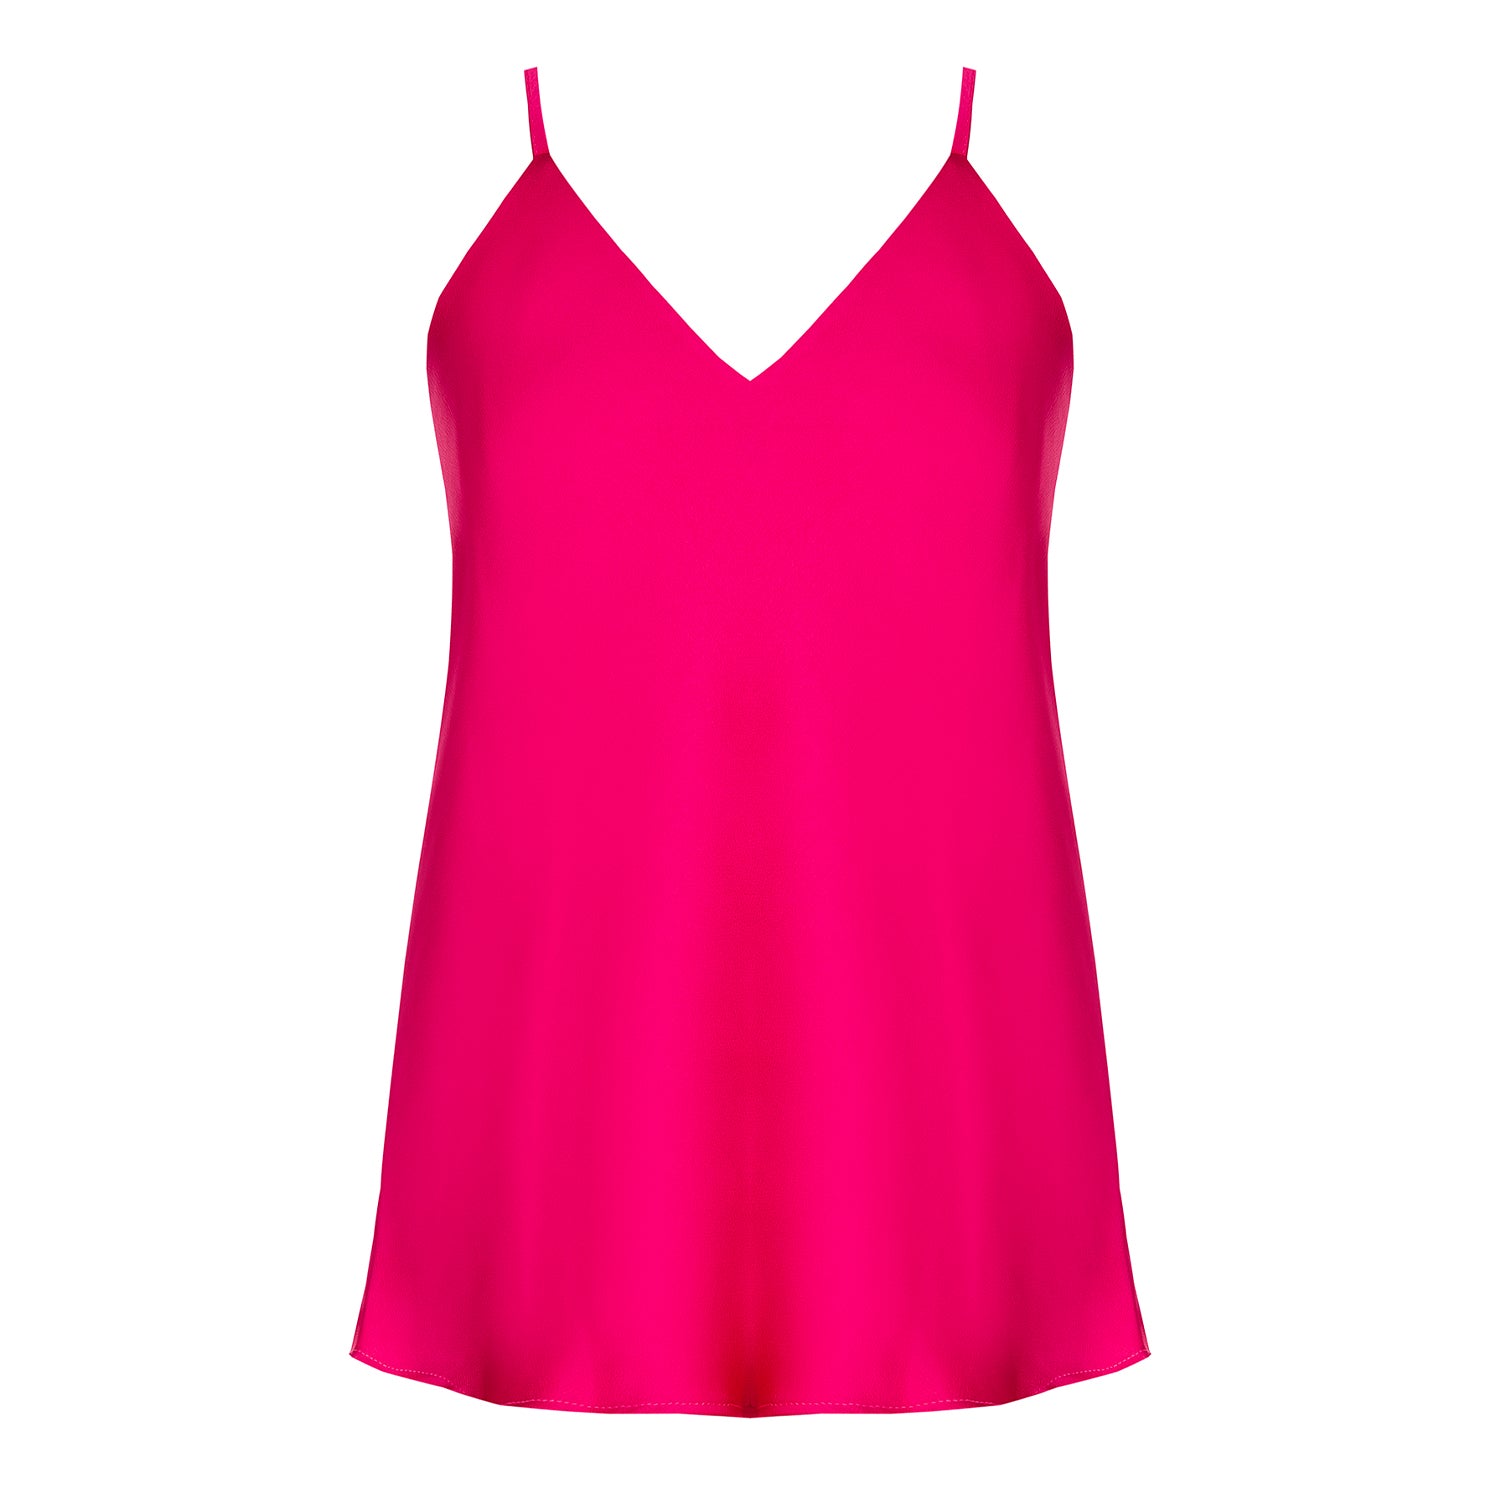 Top | Rinascimento Fuxia - For Models and Mermaids